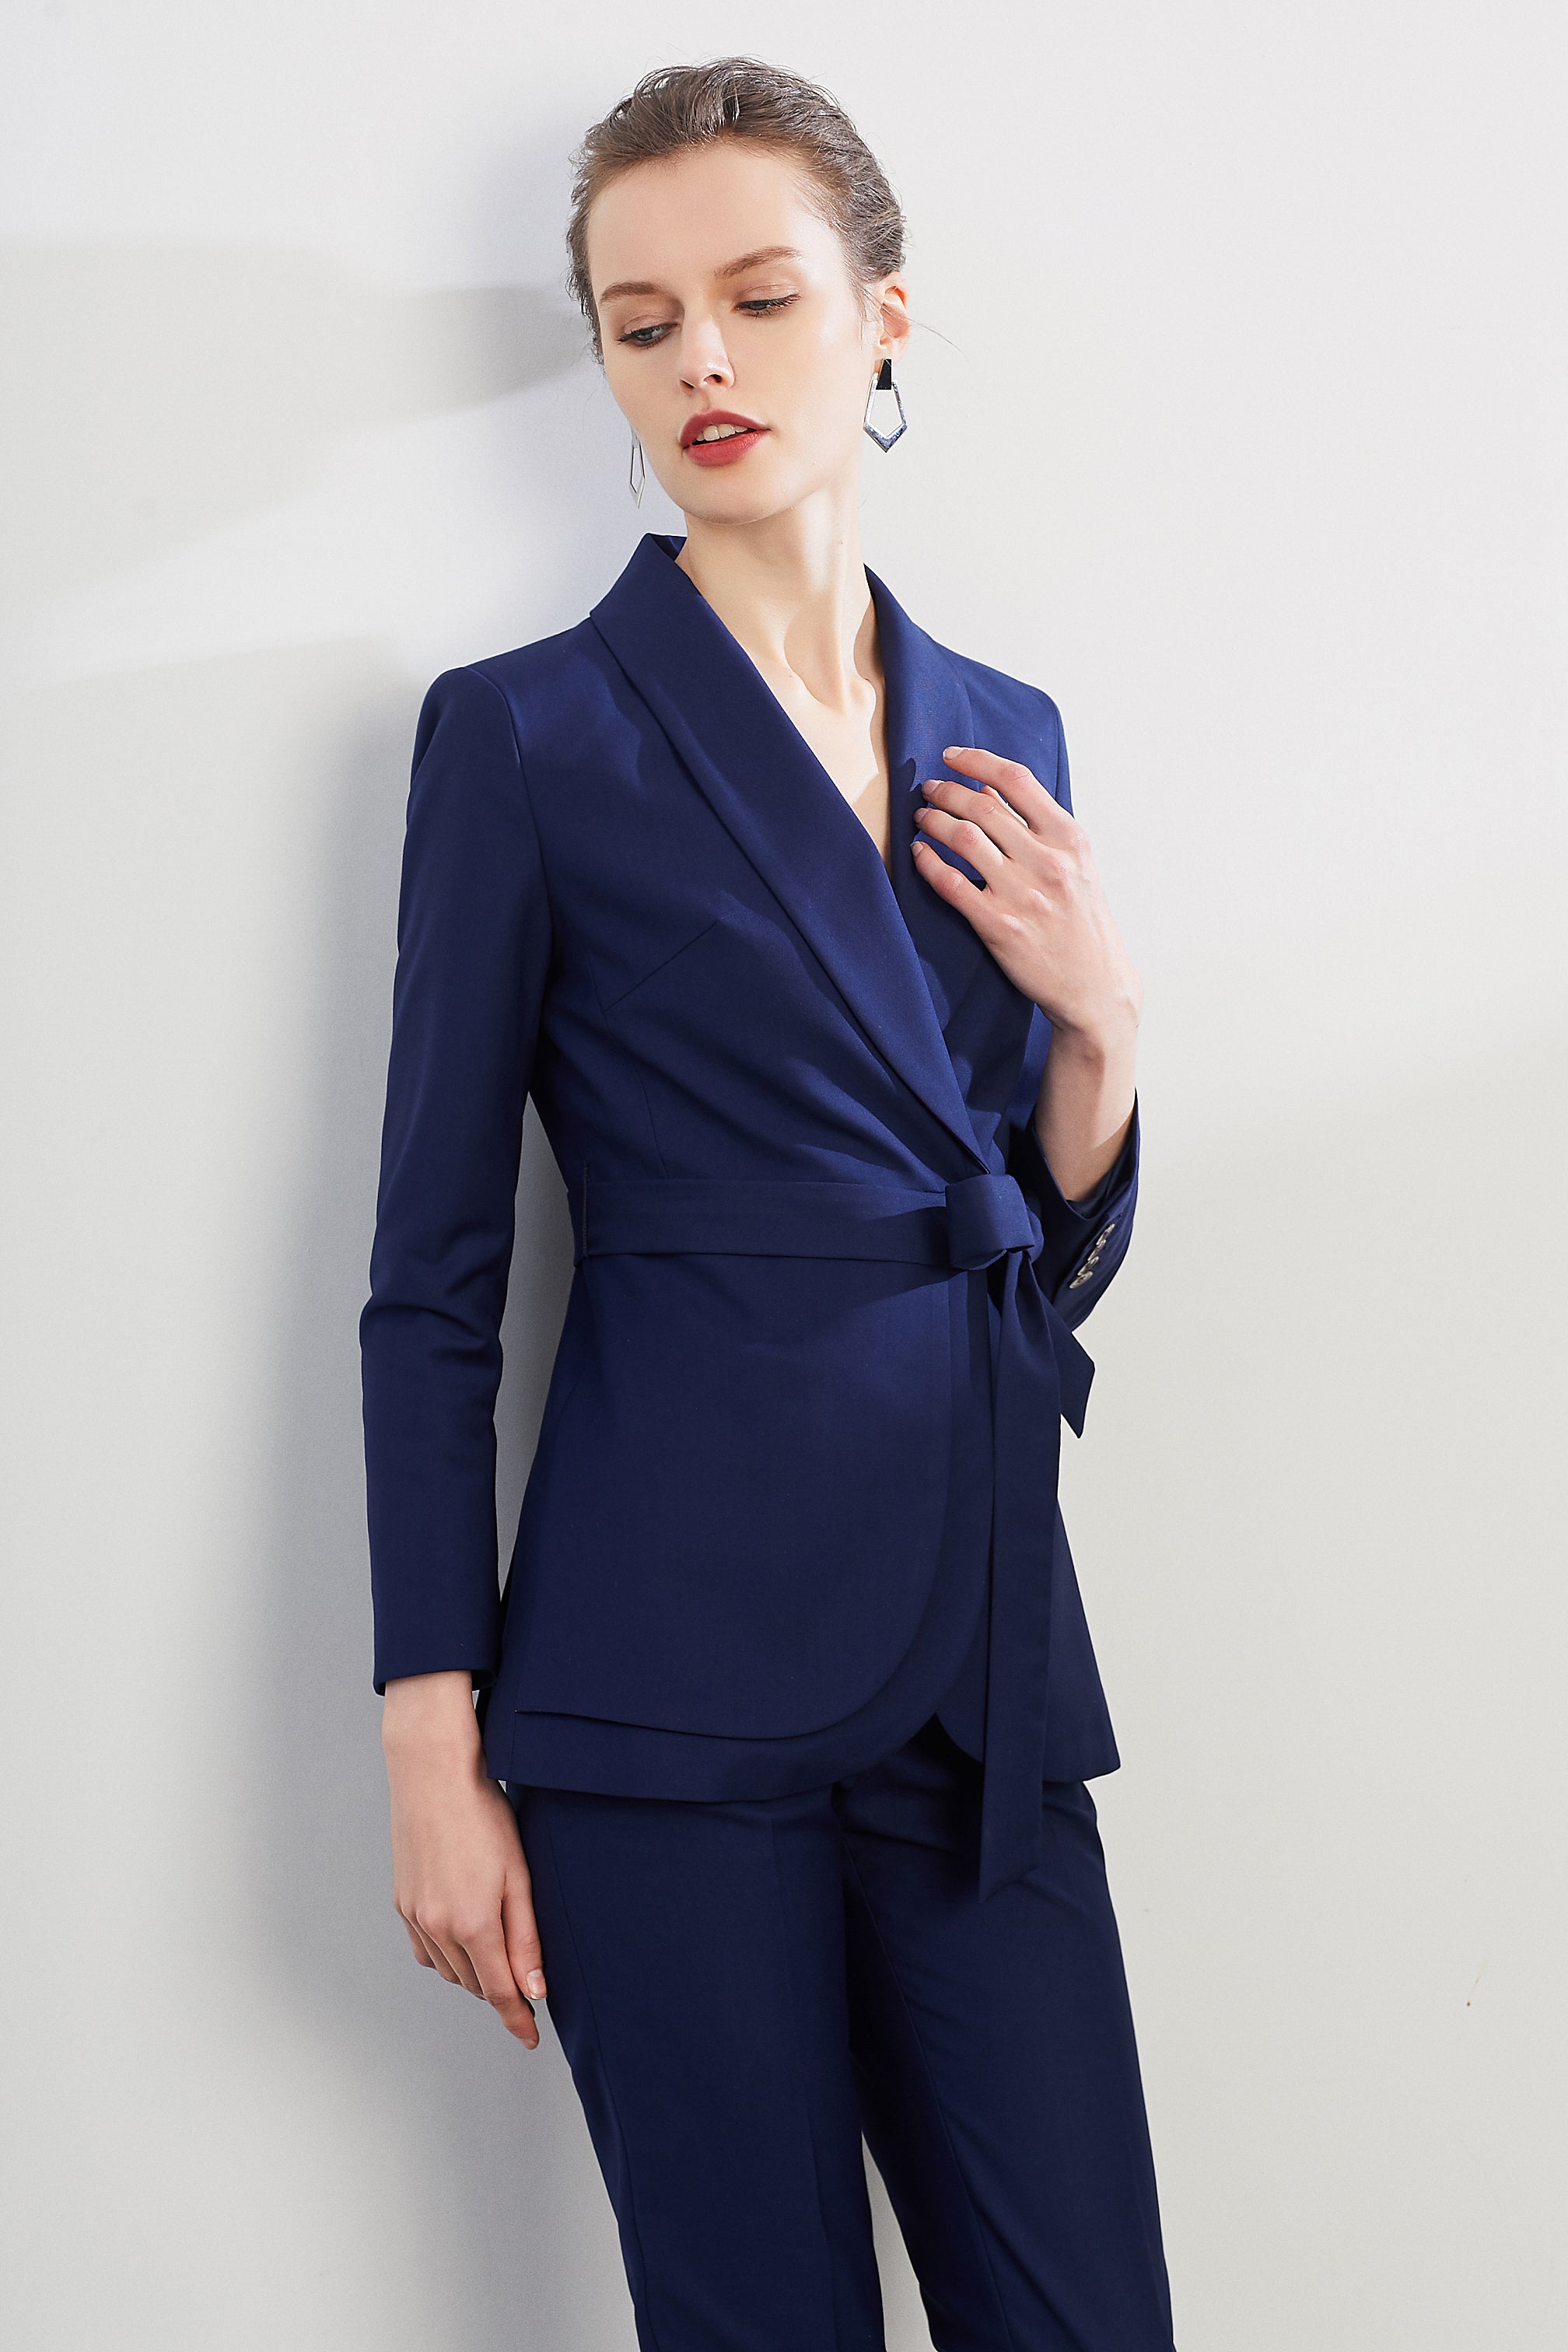 Women's Suit Sets Online: Low Price Offer on Suit Sets for Women